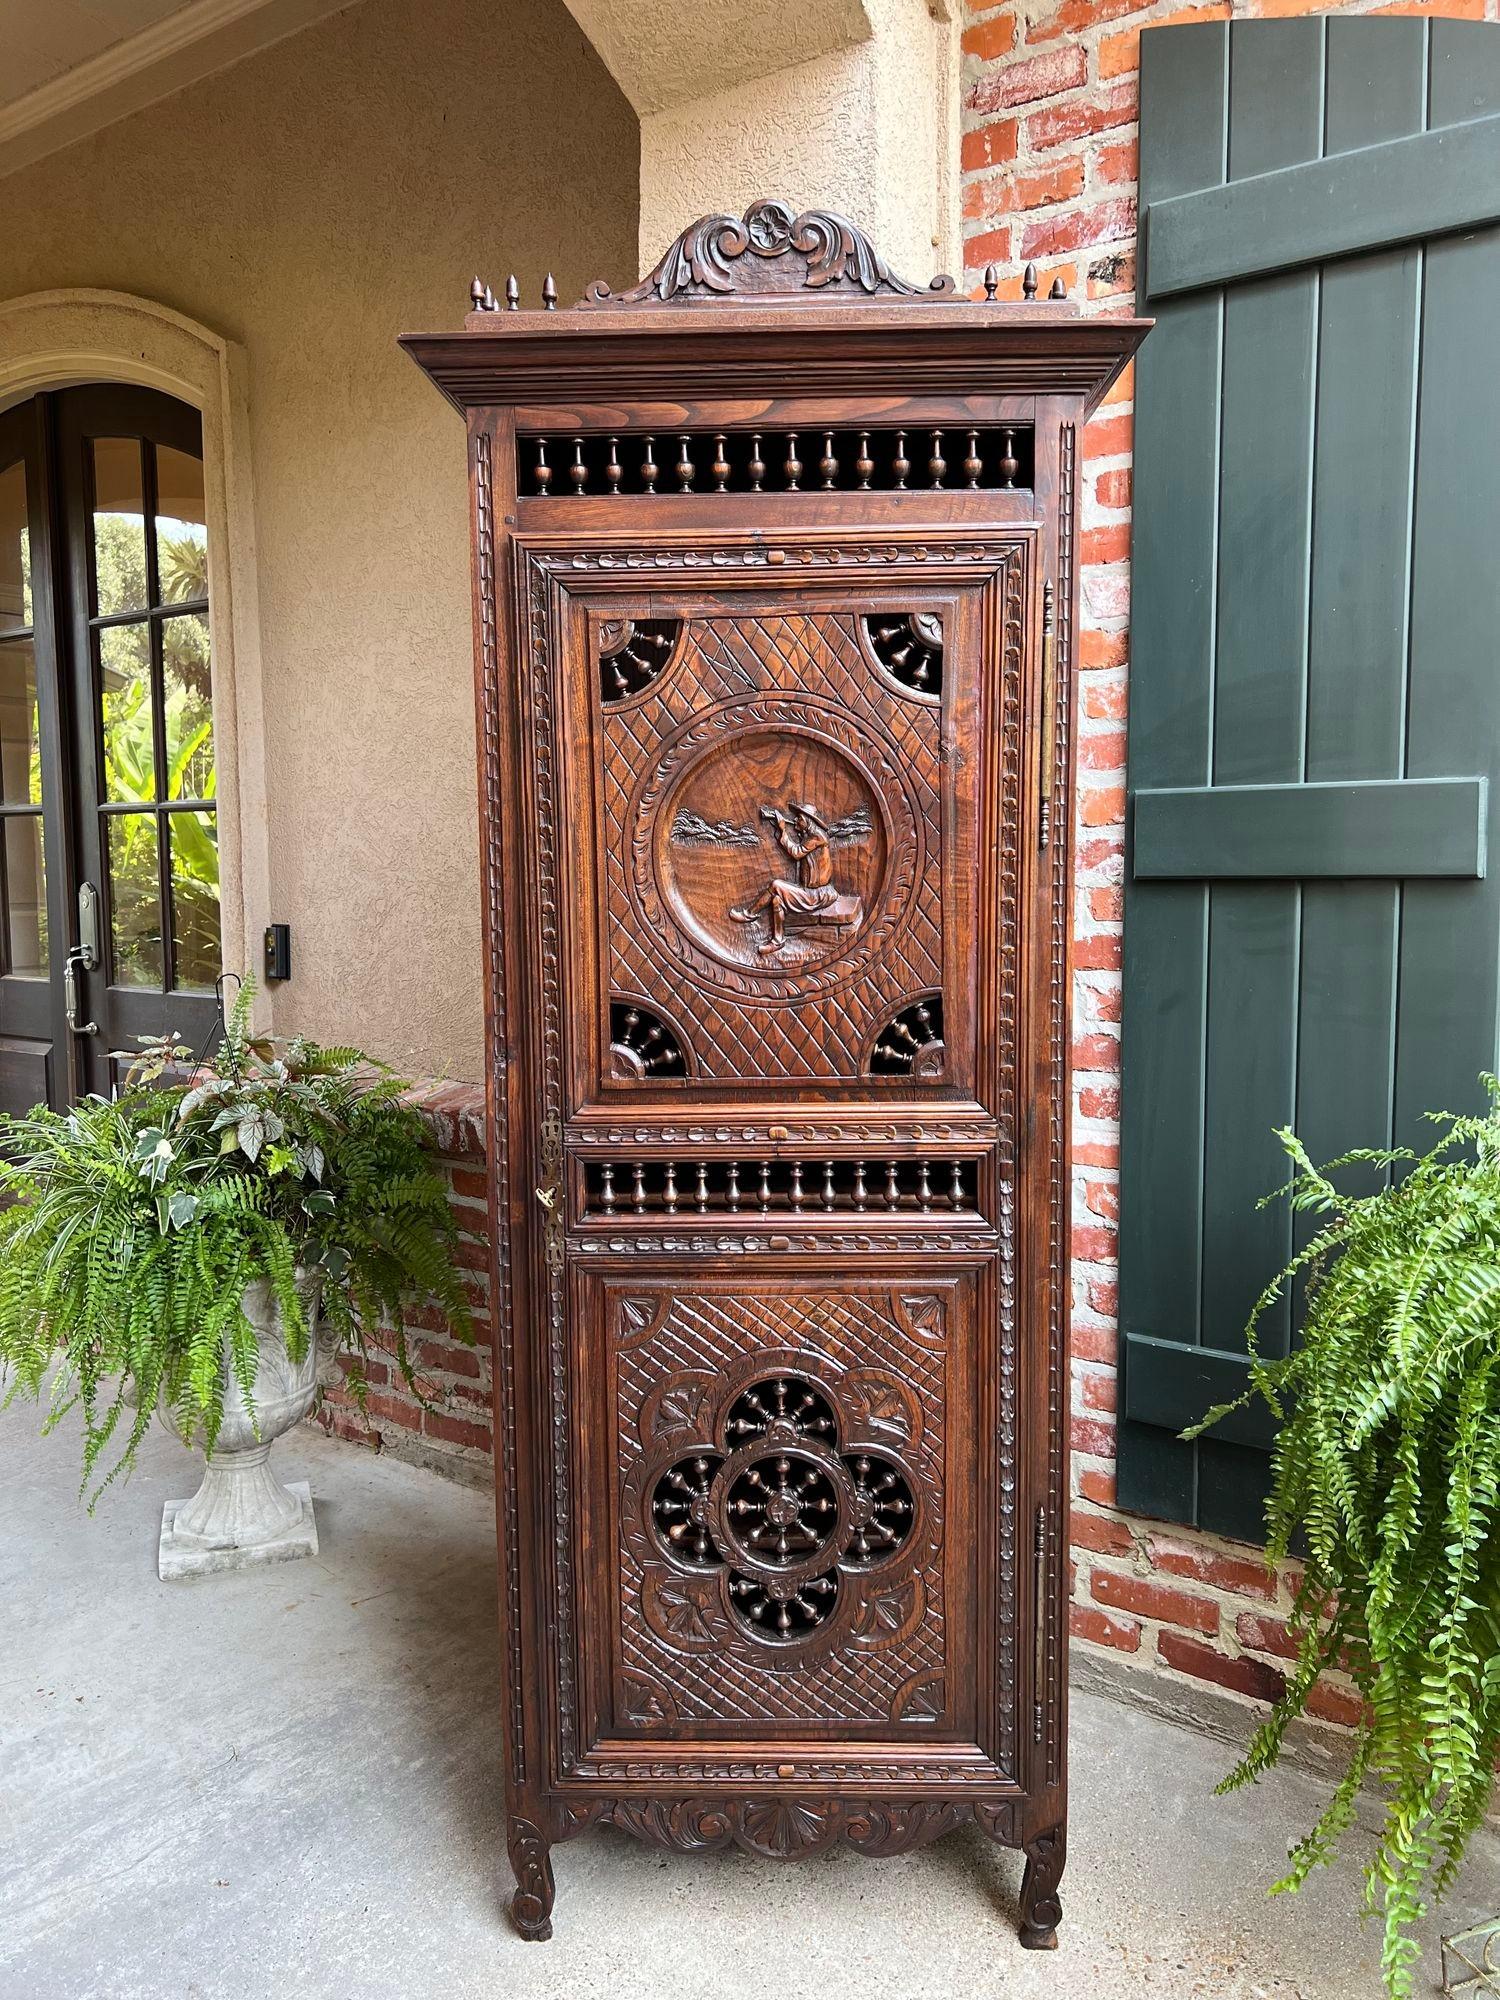 Antique French Carved Bonnetiere Armoire Cabinet Brittany Breton Ship Spindle.

Direct from France, a lovely antique French armoire or “bonnetiere” cabinet, with gorgeous hand carvings throughout.  The slender, smaller size makes a “bonnetiere”